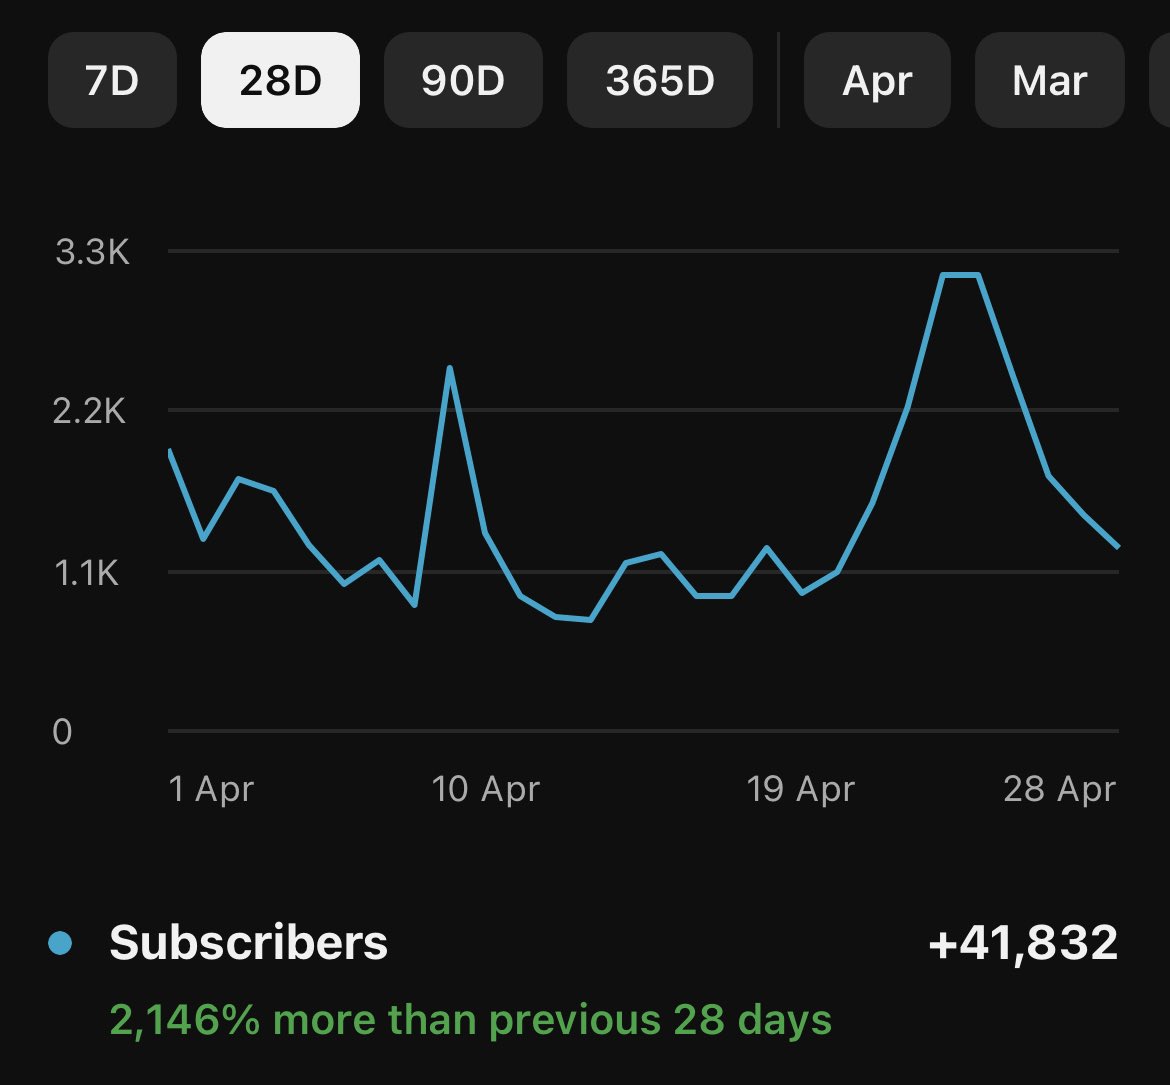 All Long-form Subscribers 👀 You wouldn’t think that this channel was gaining less than 1k a month, but now he’s fucking killing it! Thread coming shortly so follow to stay updated 👀